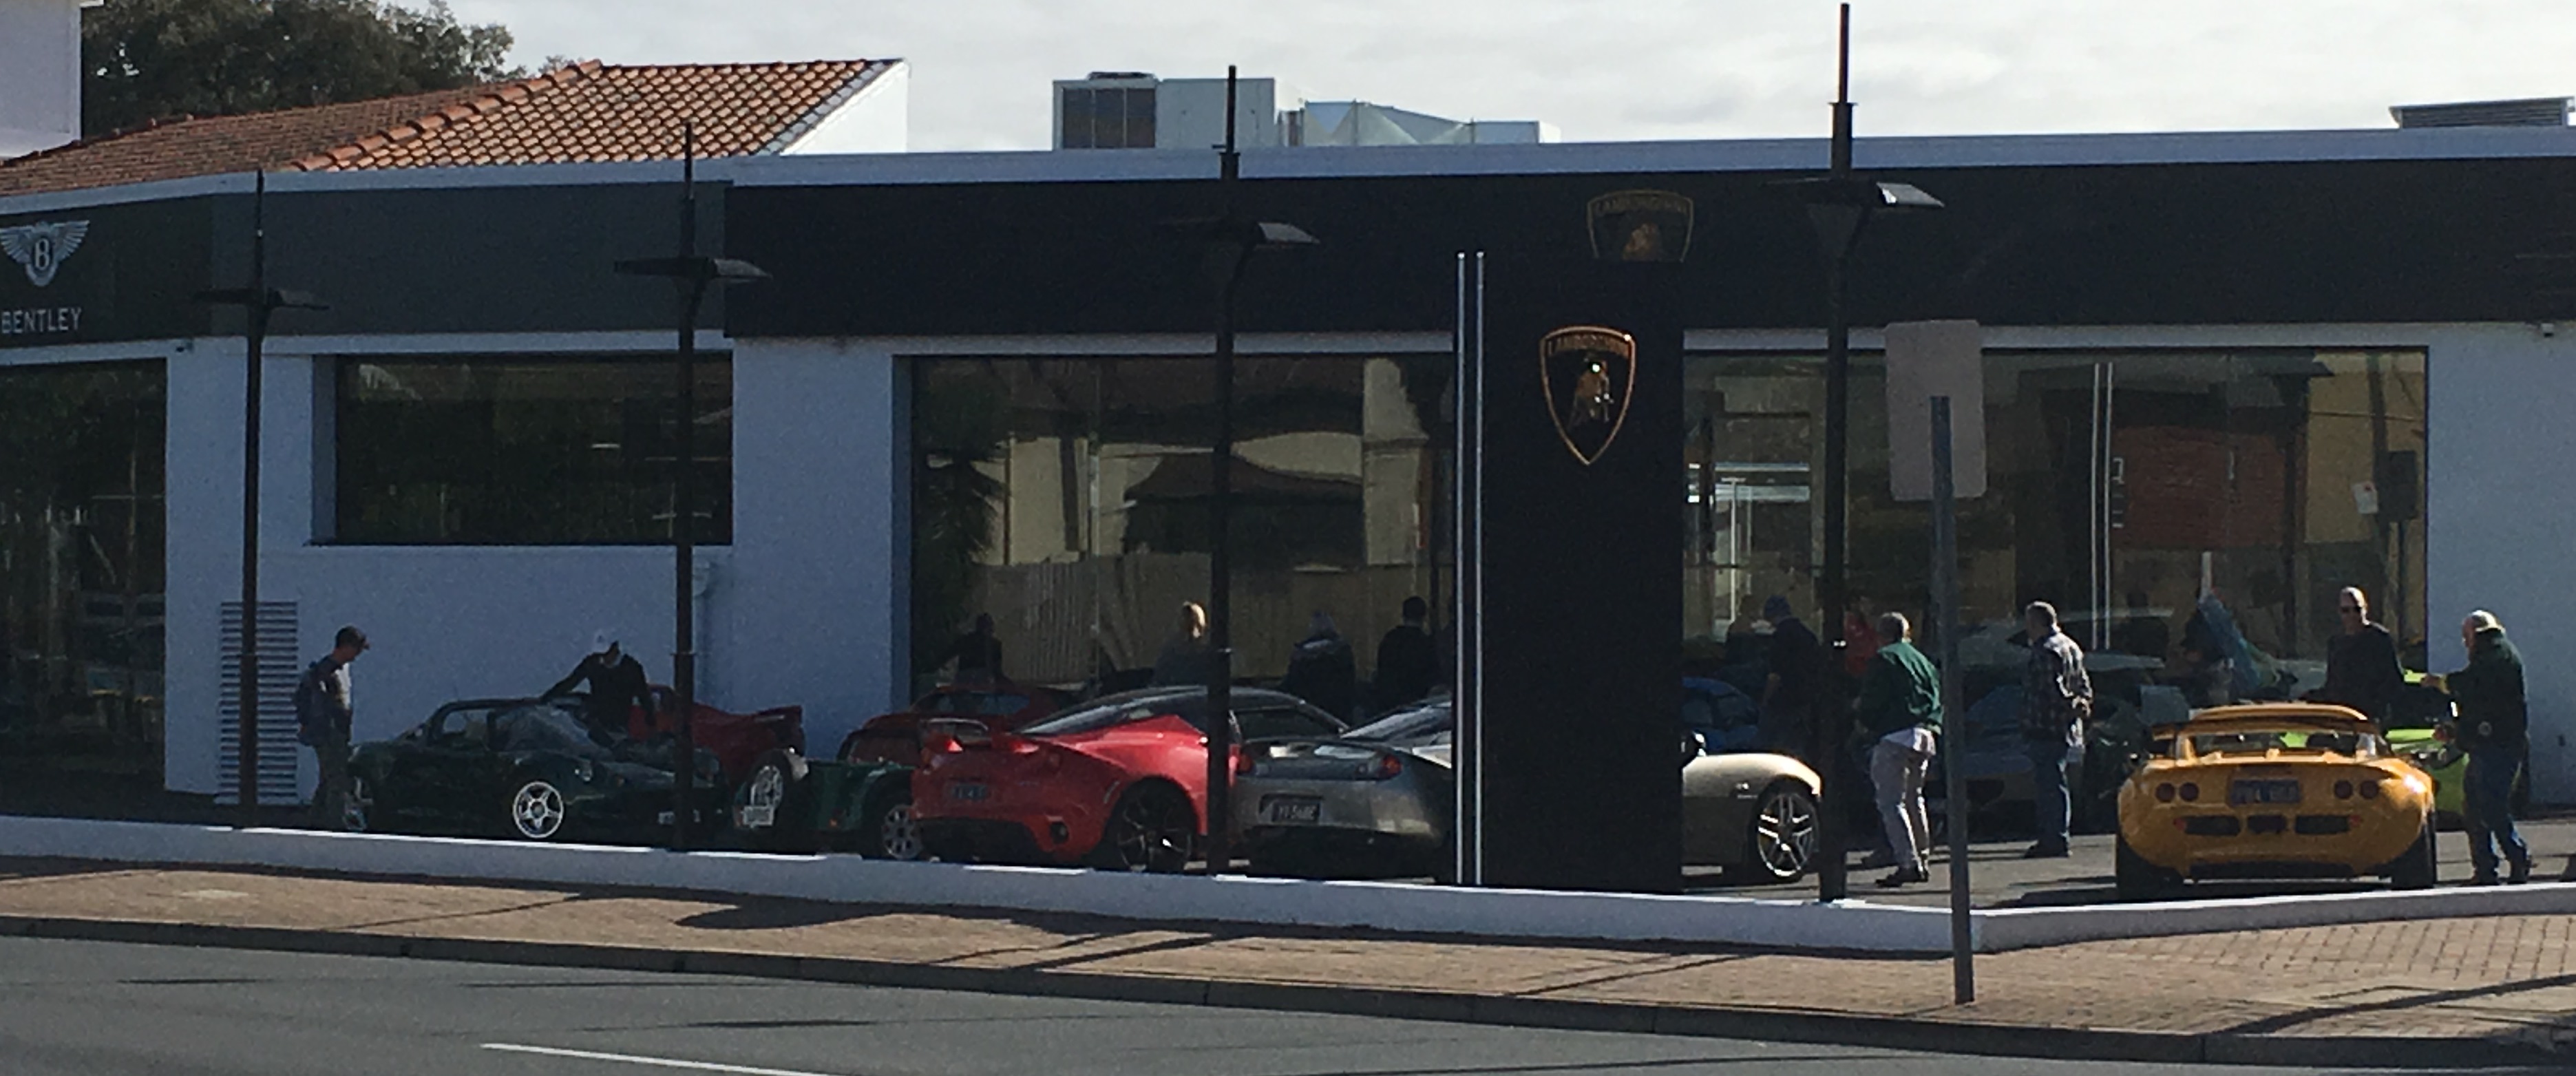 Looks like a showroom in need of a Lotus sign